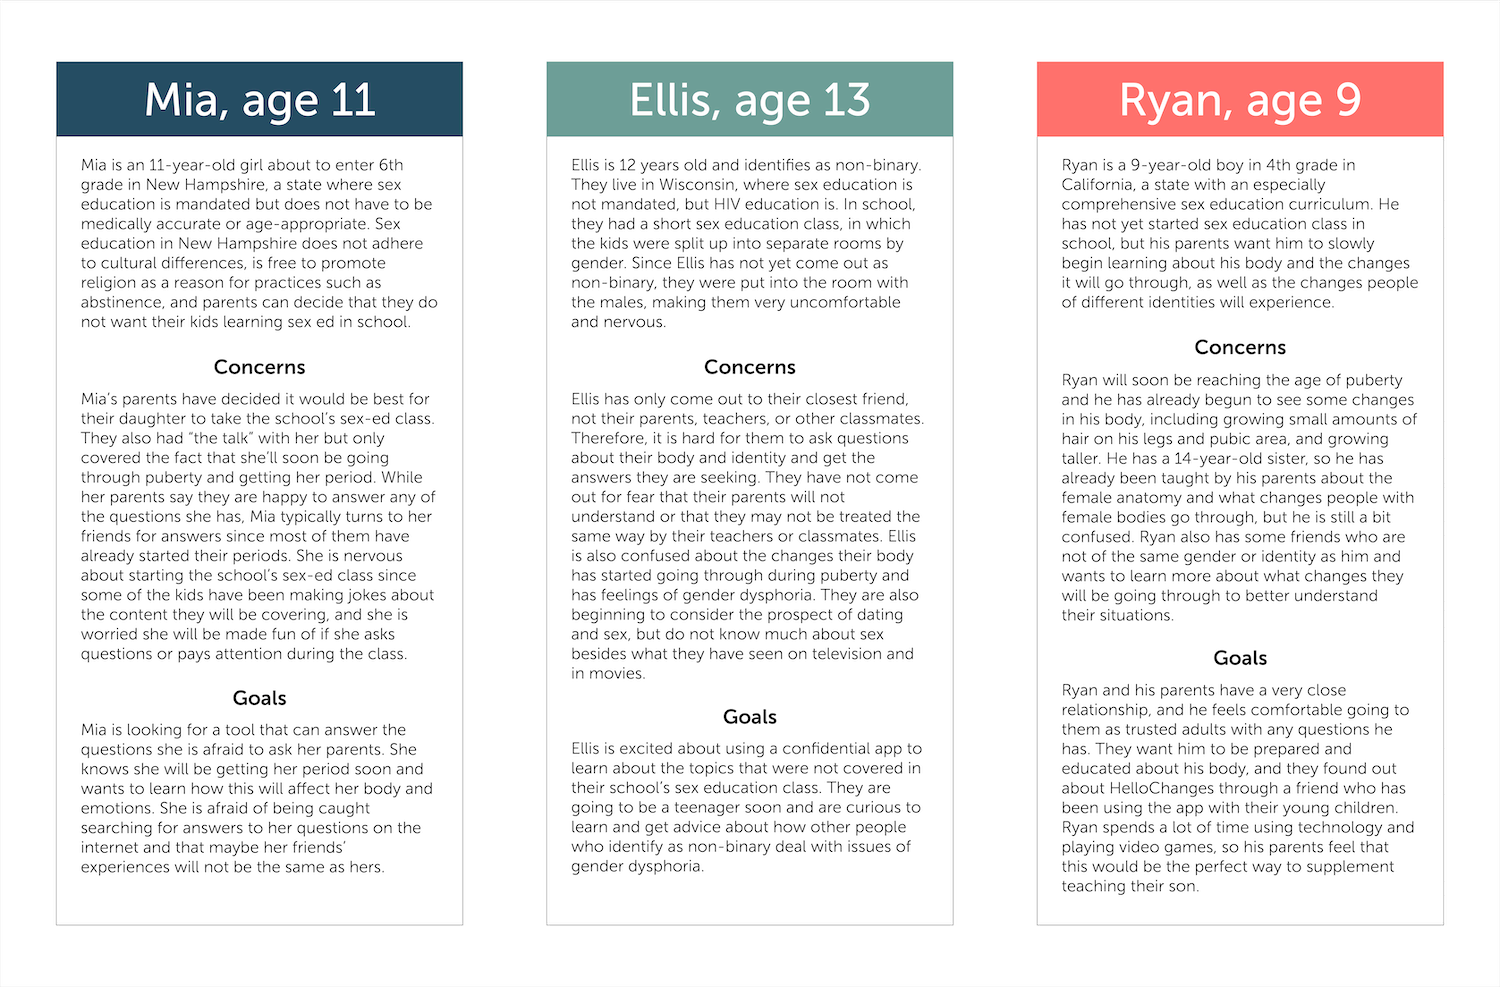 Three vertical boxes, each with a different color bar at the top with the names Mia, Ellis, and Ryan. Below these headers are three paragraphs about each person, including background information about where they are from, concerns they have in terms of their physical and emotional development, and goals they have for using the HelloChanges app.